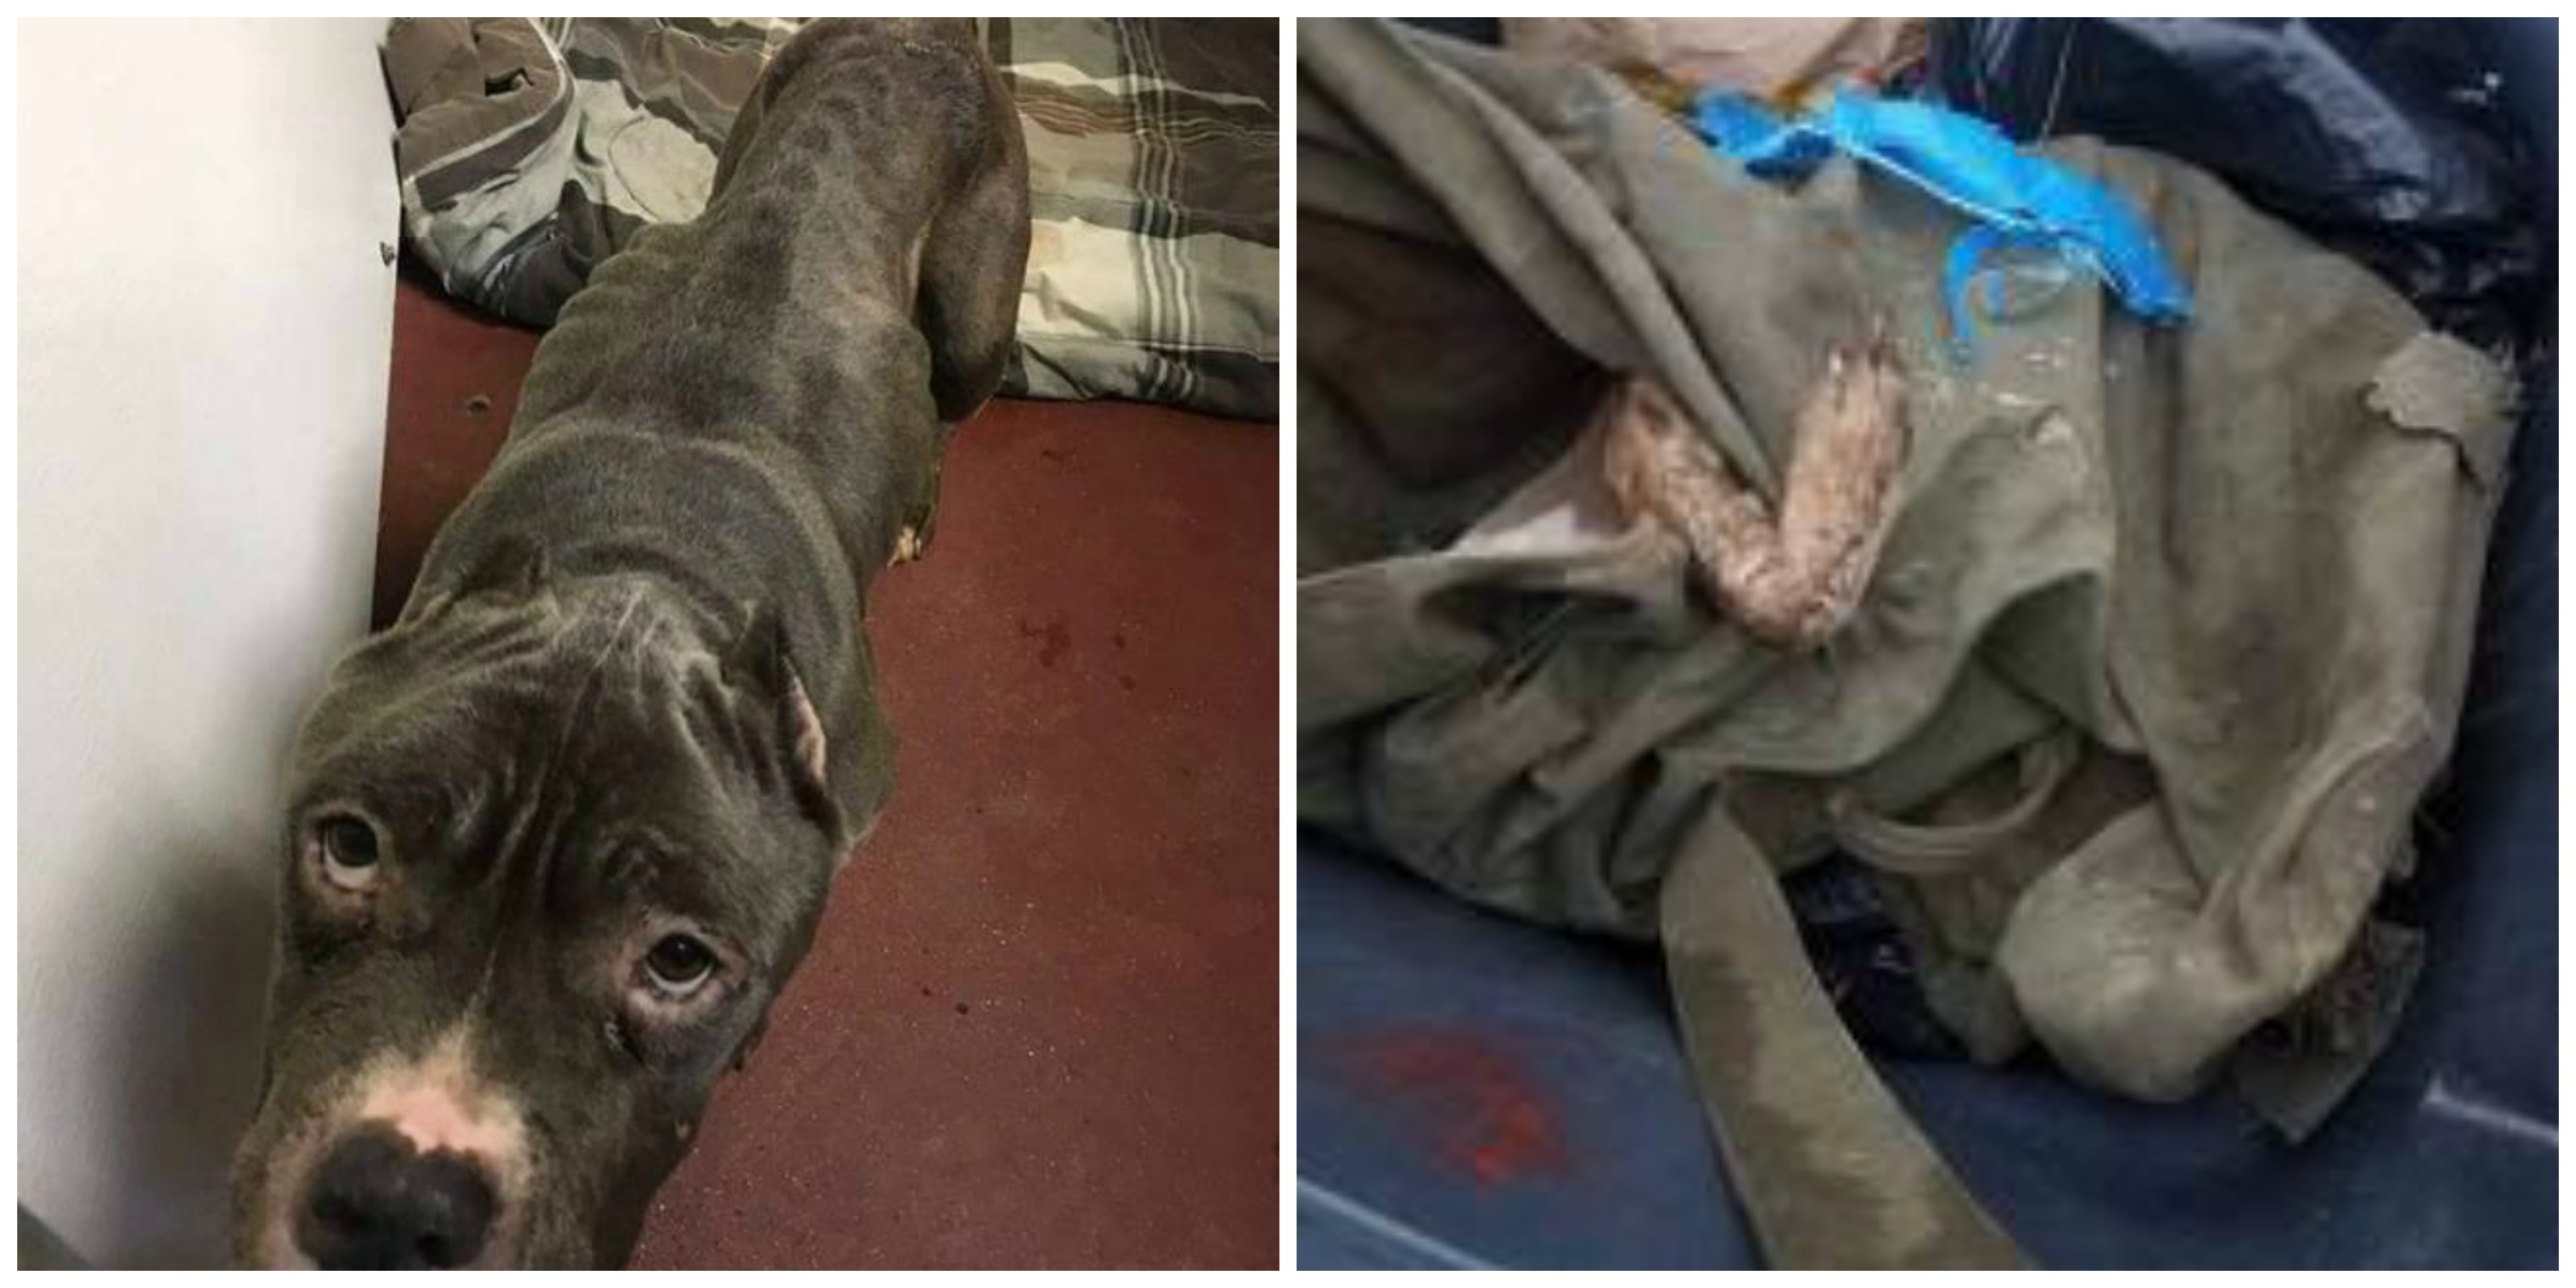 Dead and starved dog found at Iowa residence